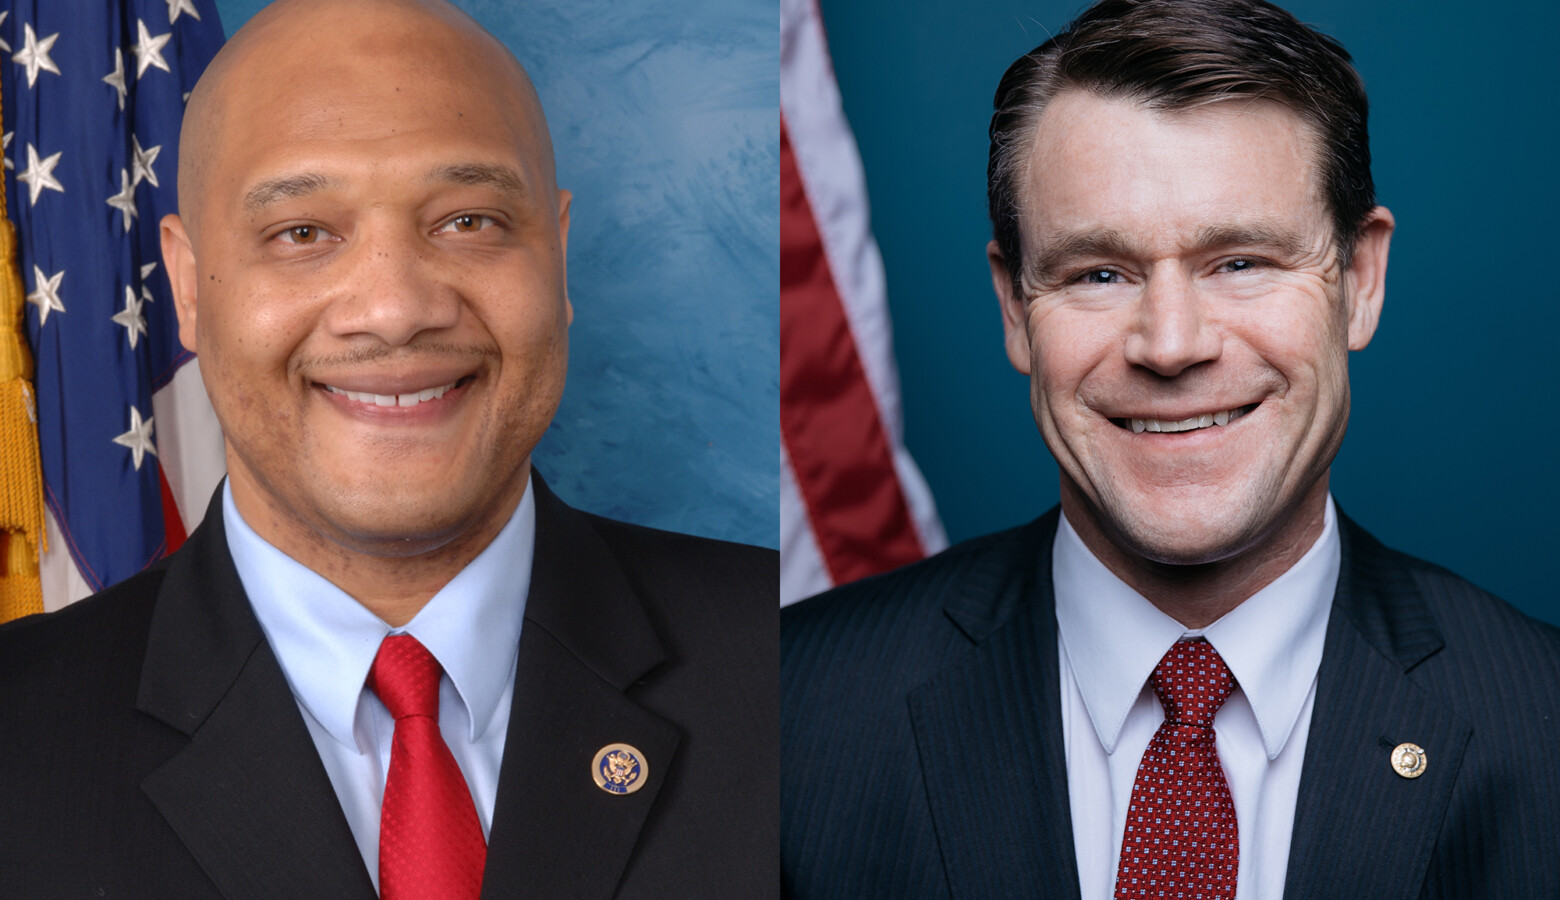 U.S. Rep. André Carson (D-Indianapolis), left, is a strong backer of President Joe Biden's agenda. U.S. Sen. Todd Young (R-Ind.), right, said there are some areas of agreement. (Congress.gov)